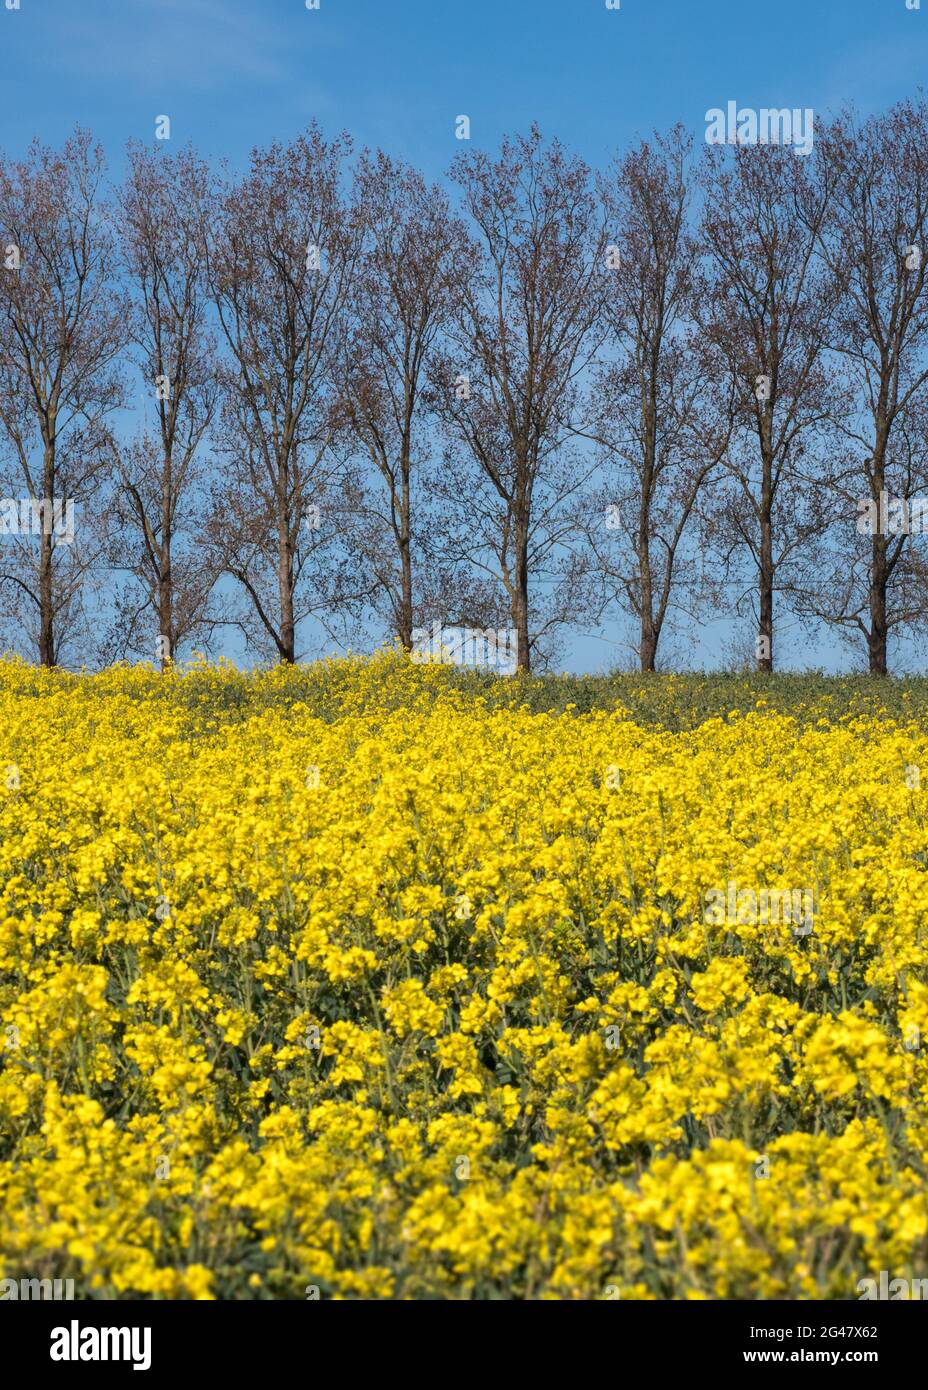 yellow field of rapeseed with line pattern geometry symmetry repetition row of poplar trees in background under clear blue sky Stock Photo